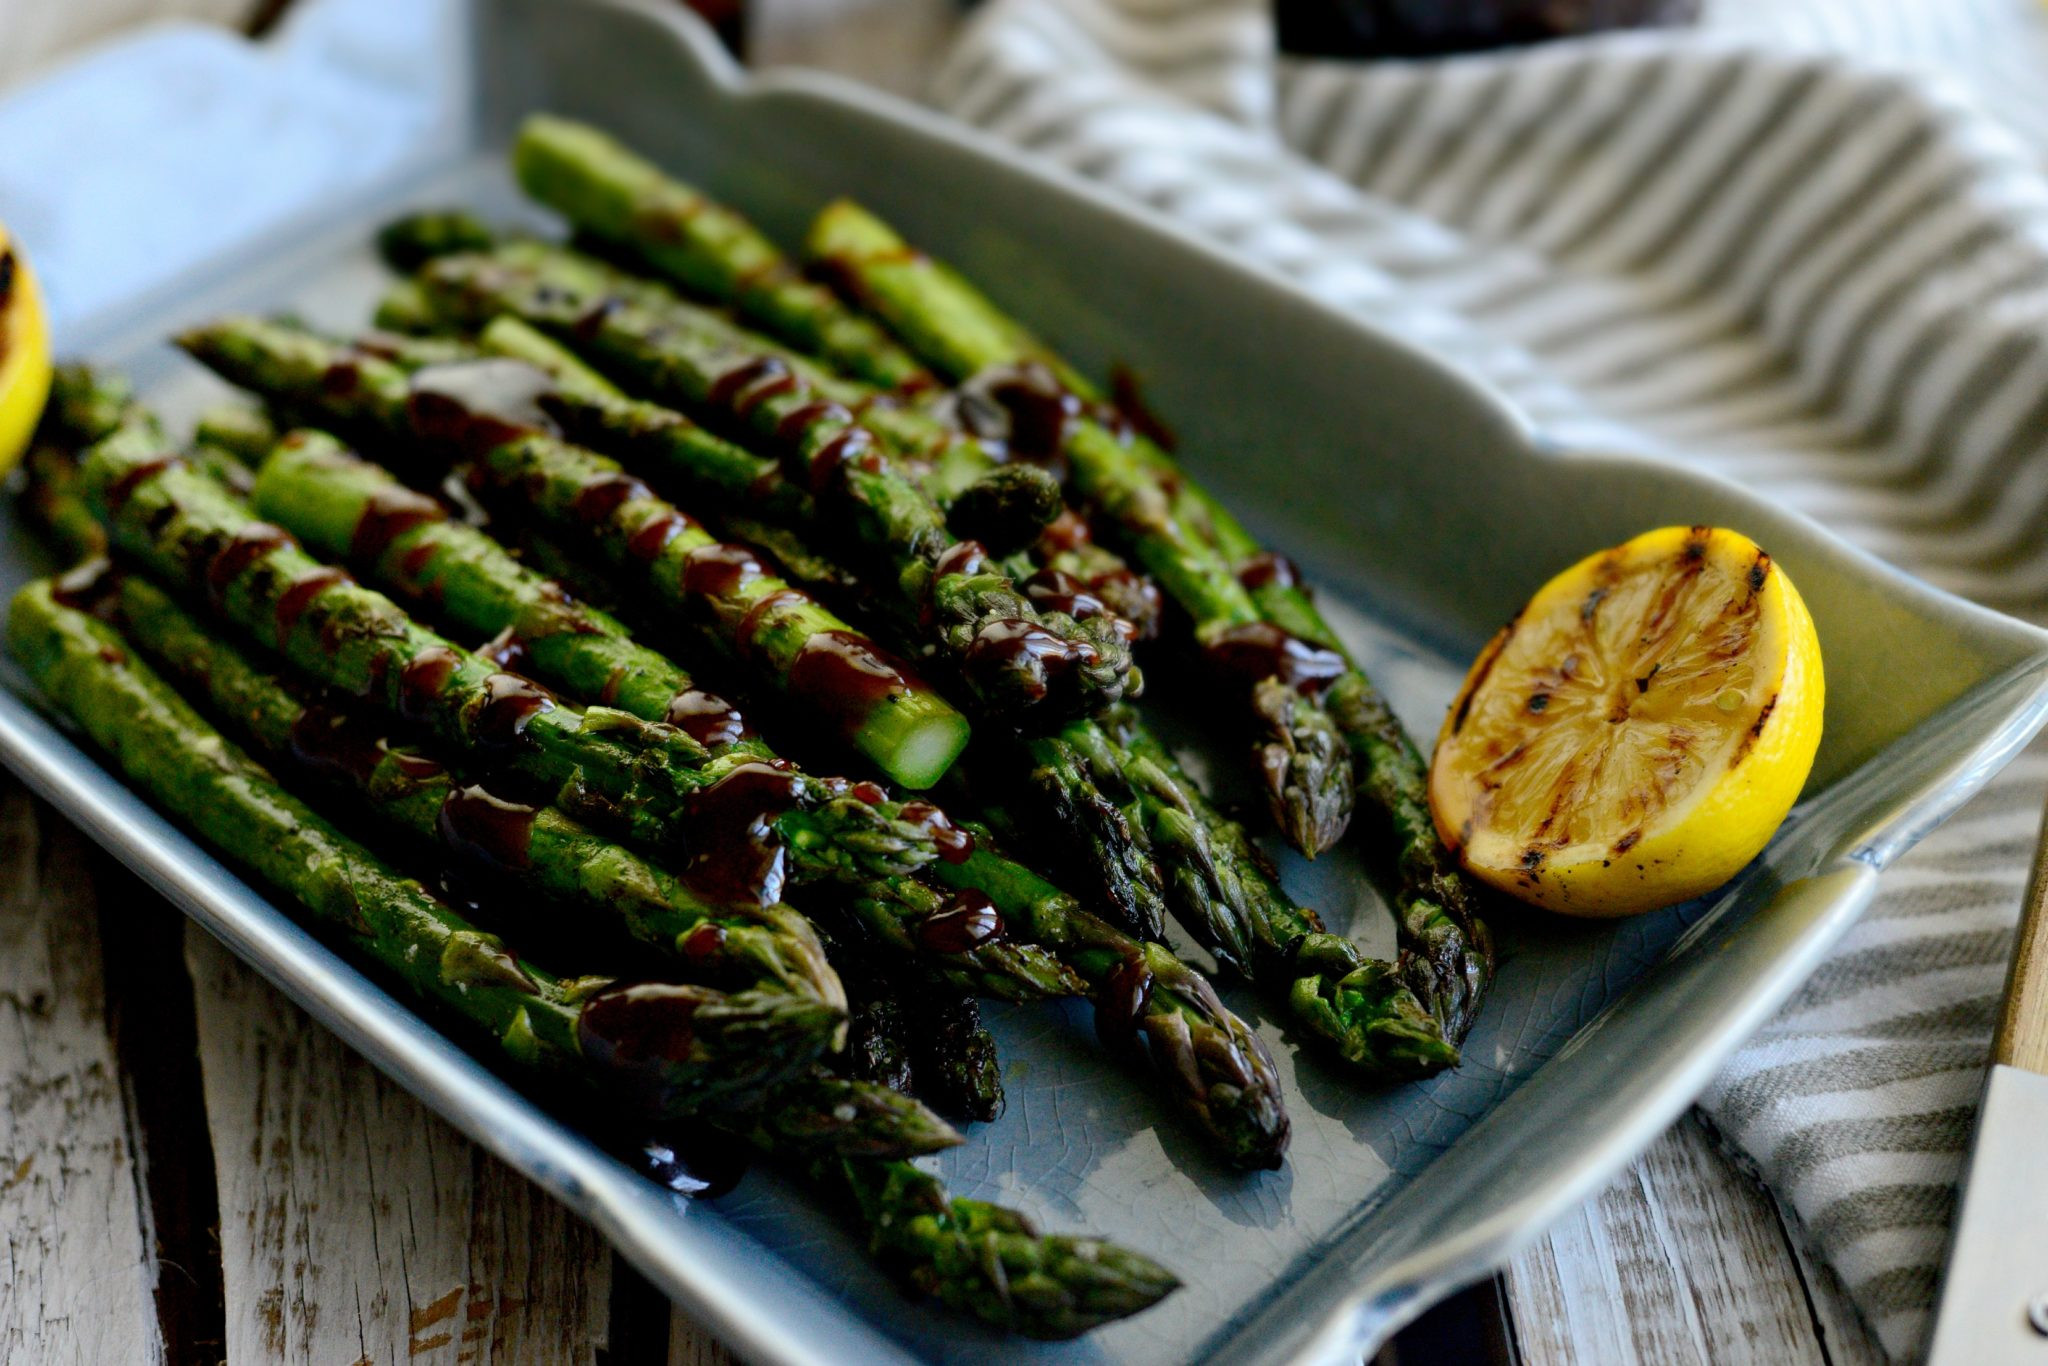 Best 15 Recipes for Grilling asparagus